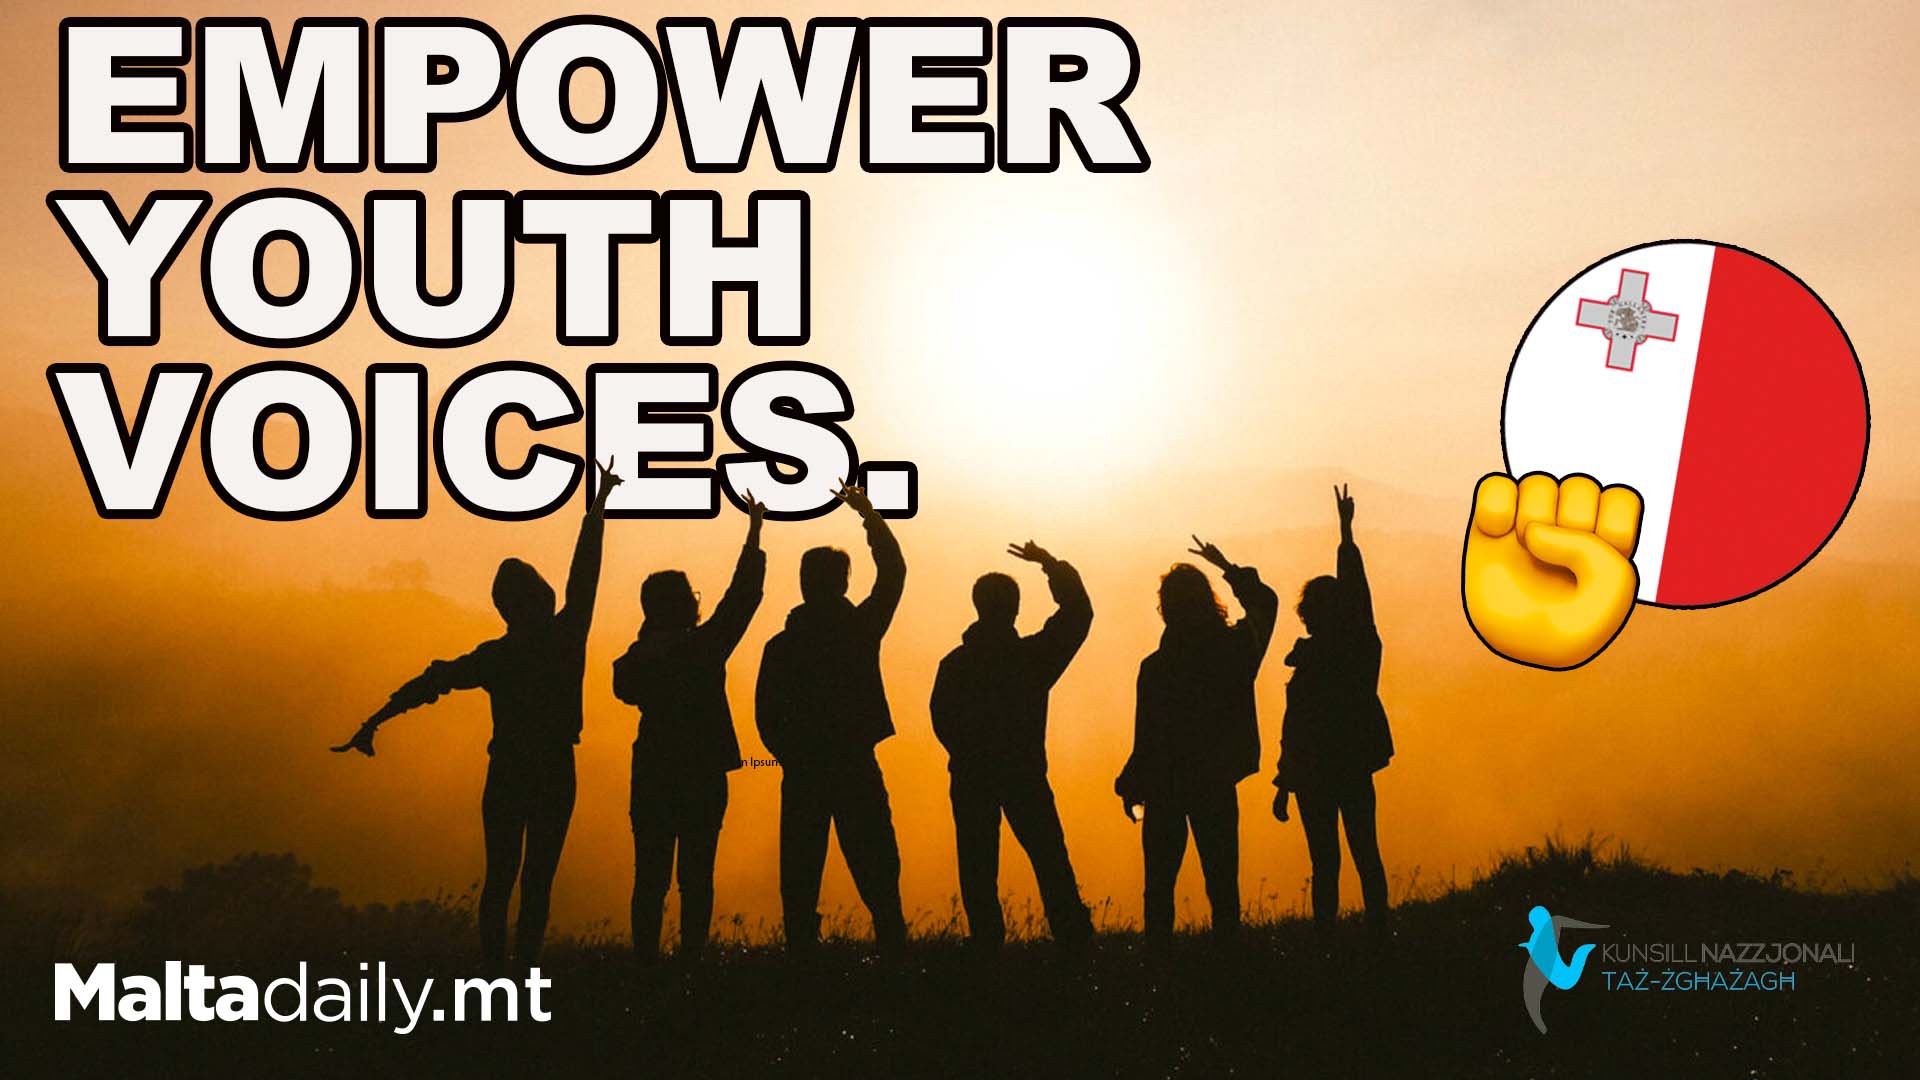 Youth Activism Matters: Empower Youth Voices